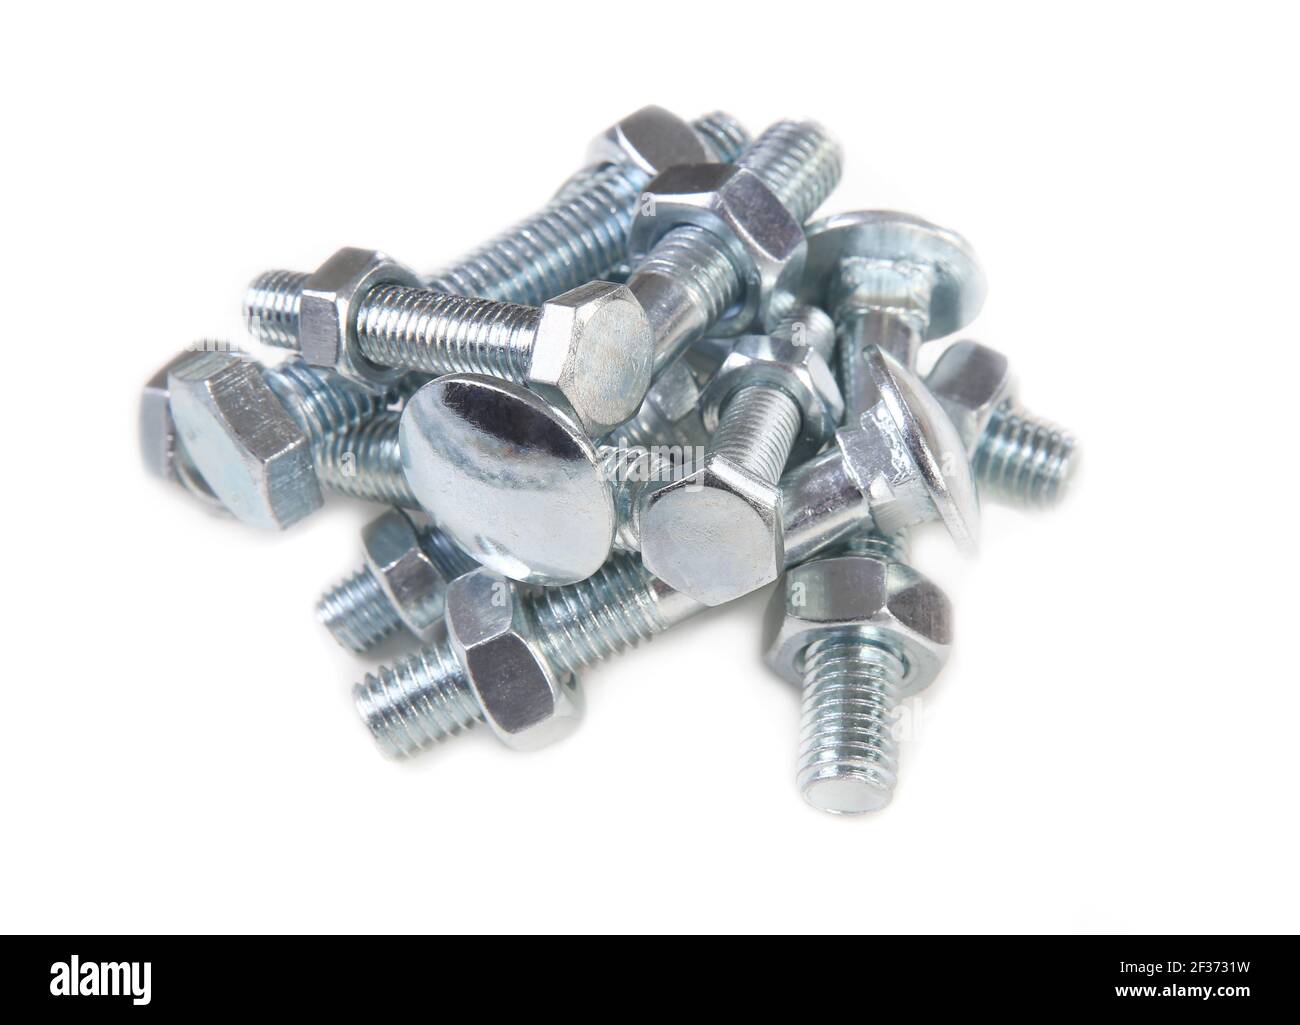 Heap of bolts and nuts. Isolated on a white background. Stock Photo